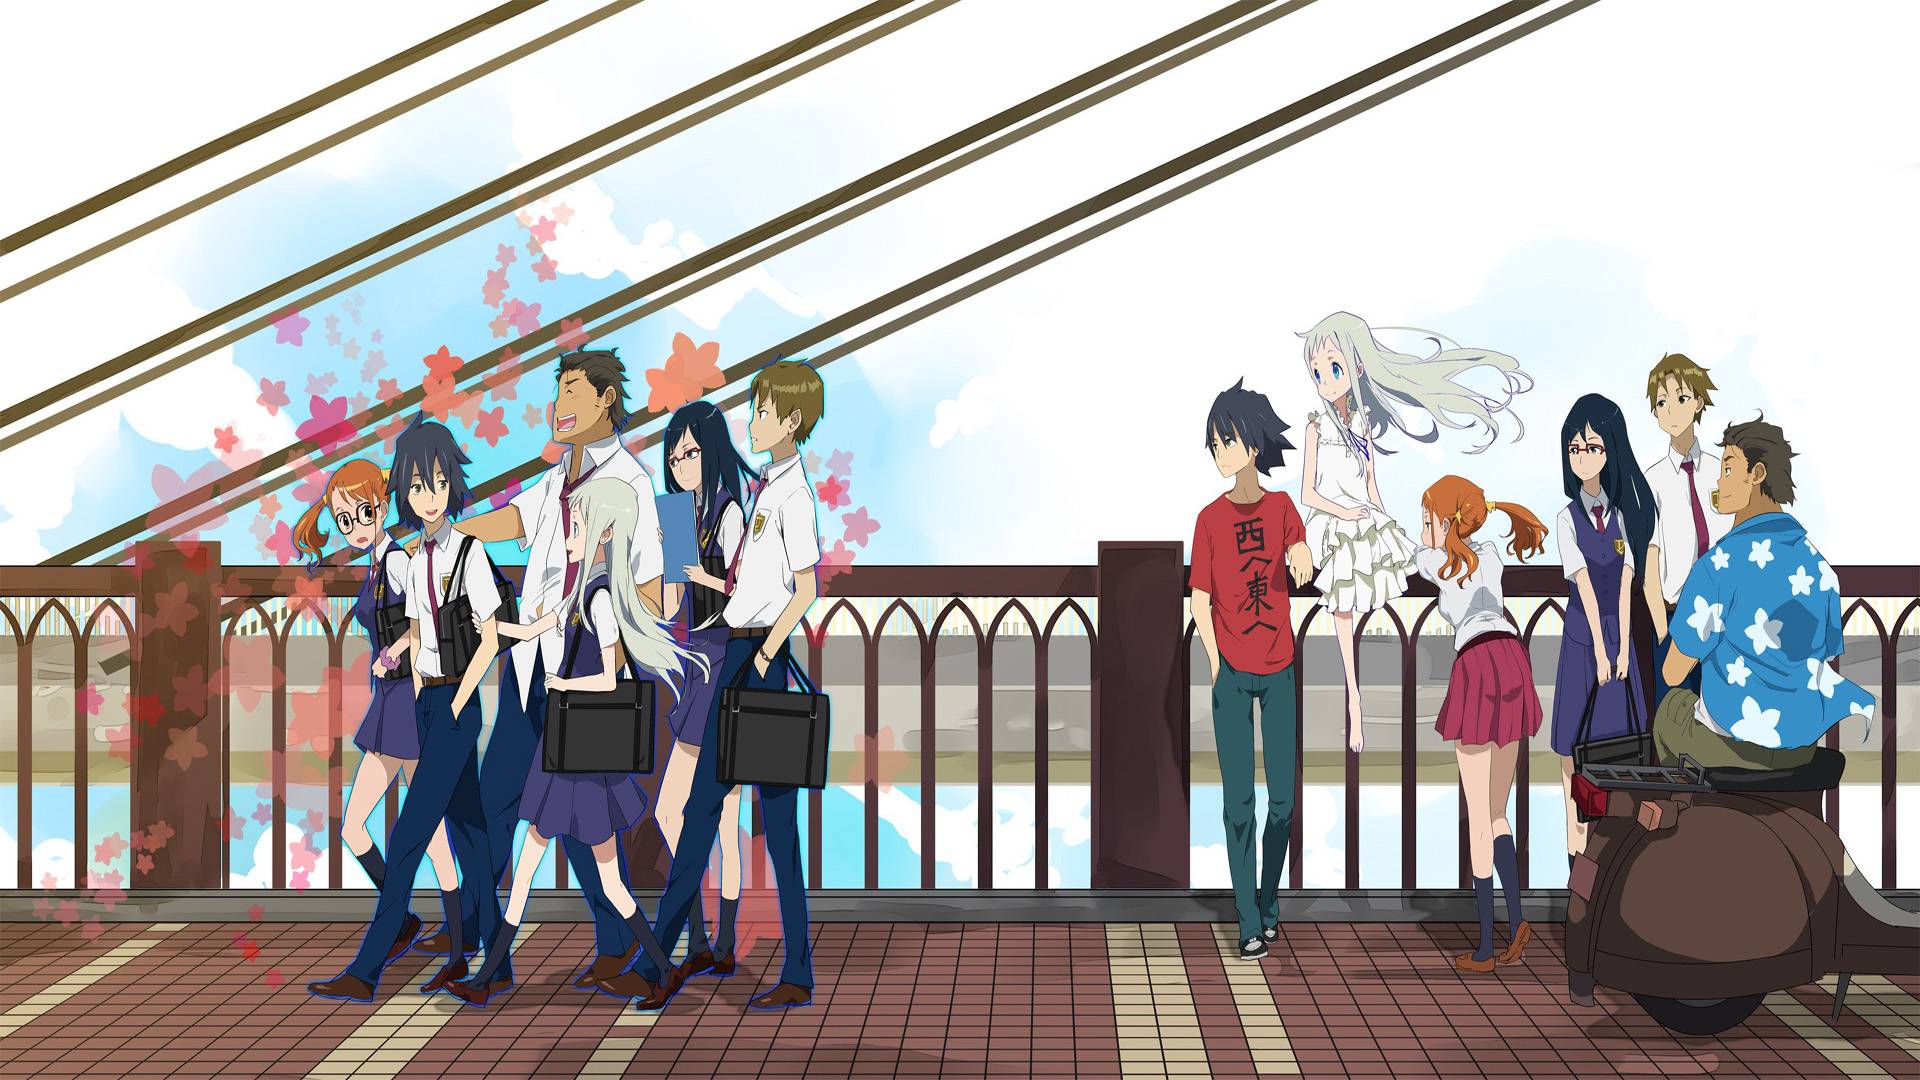 Anohana: The Flower We Saw That Day: The Flower We Saw